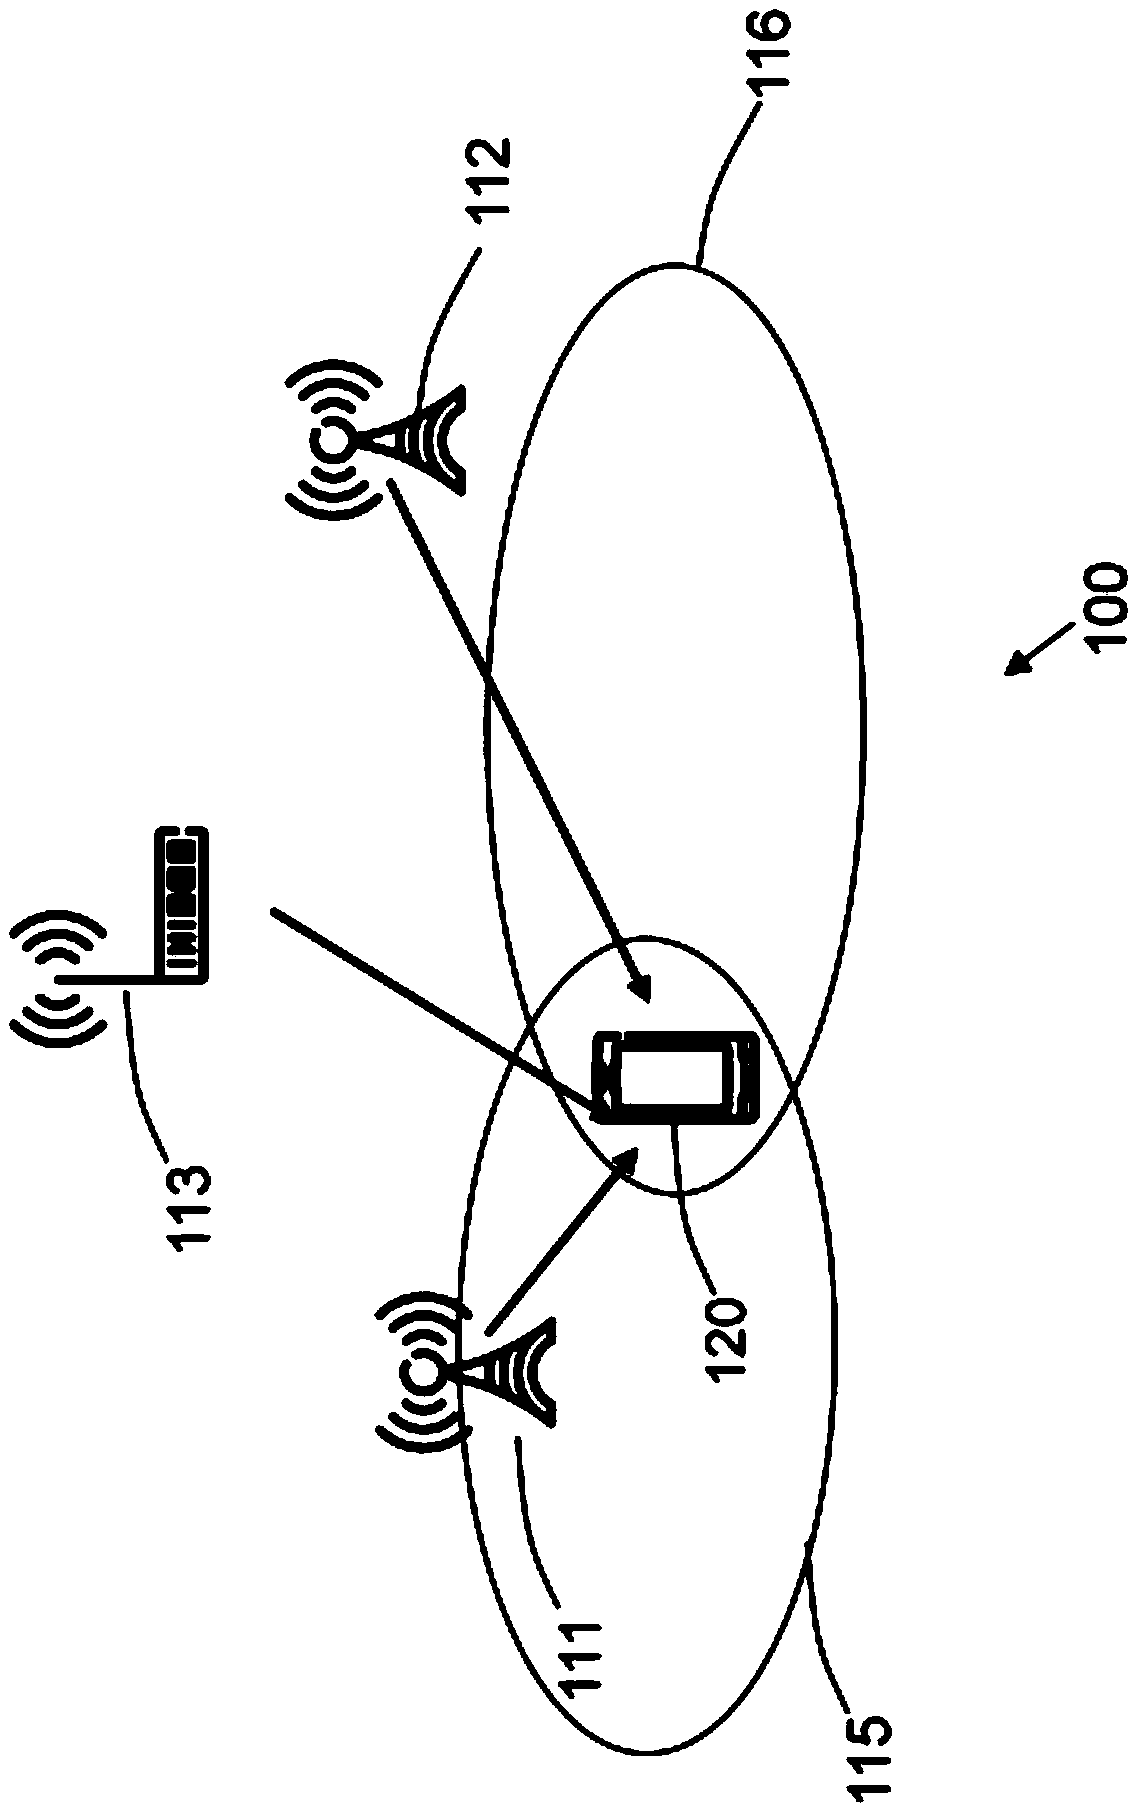 Terminal and method for inter RAT access selection in a communications network